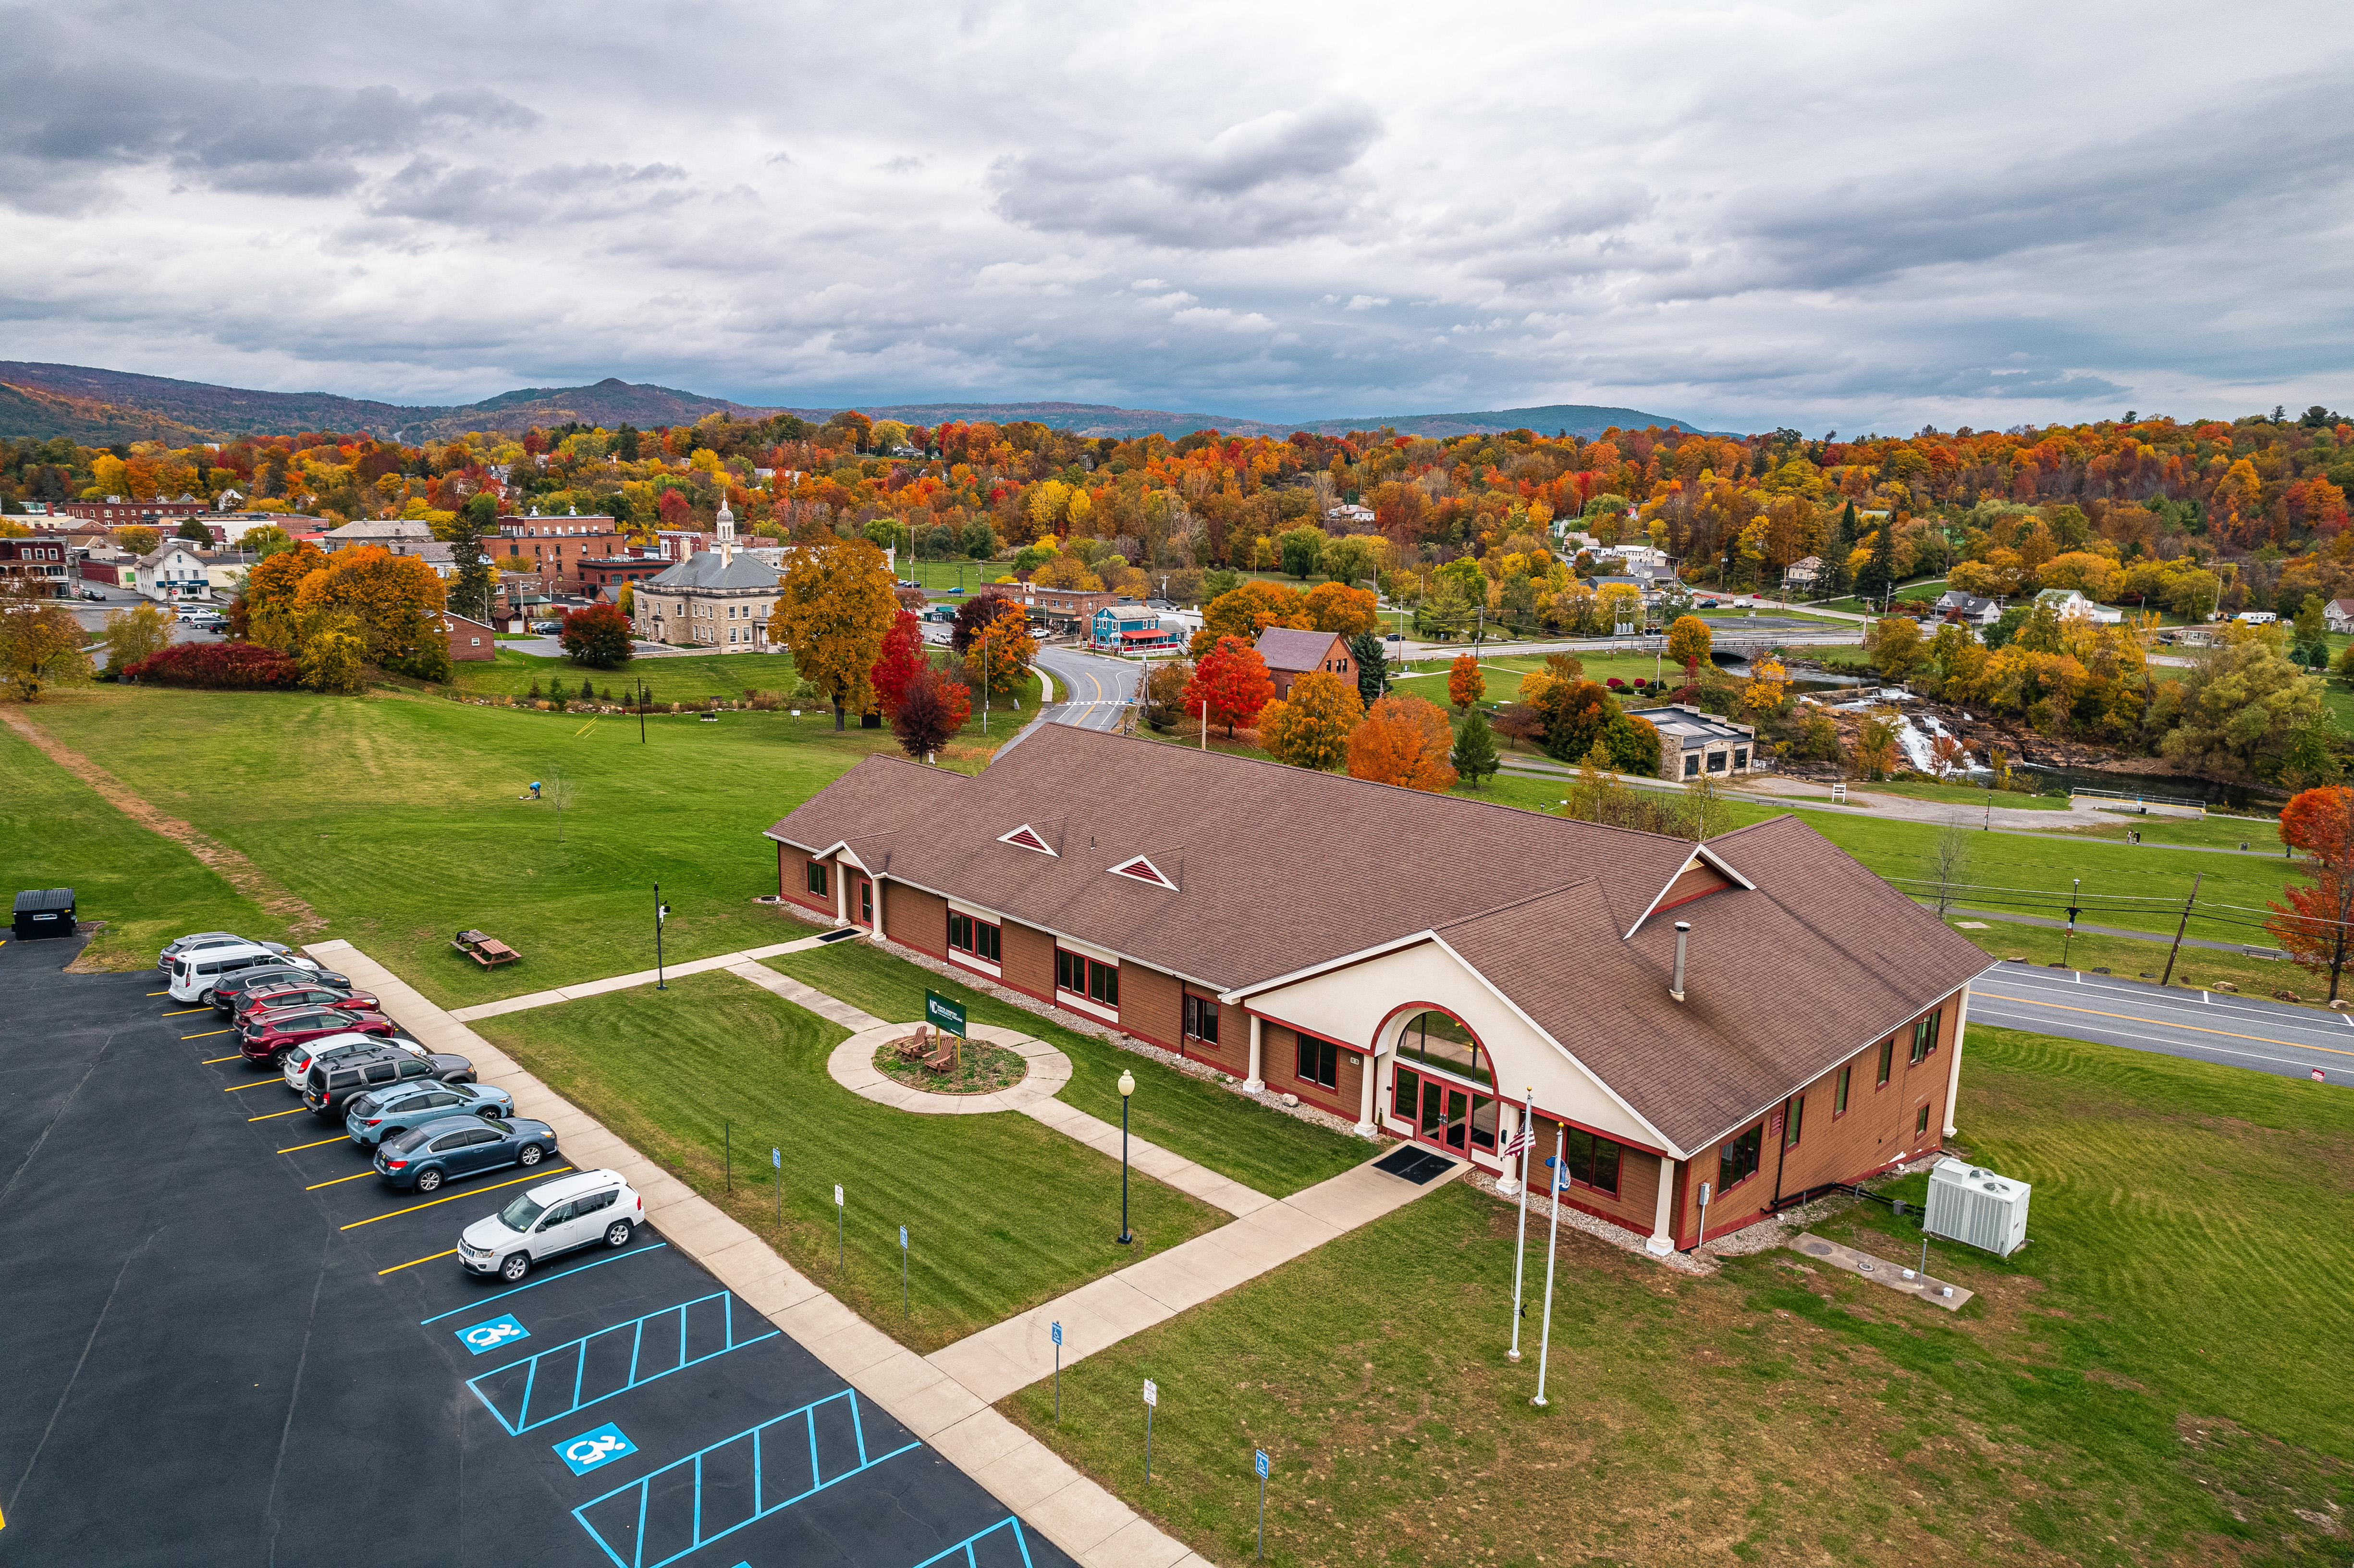 An aerial view of the Ticonderoga campus building in the fall